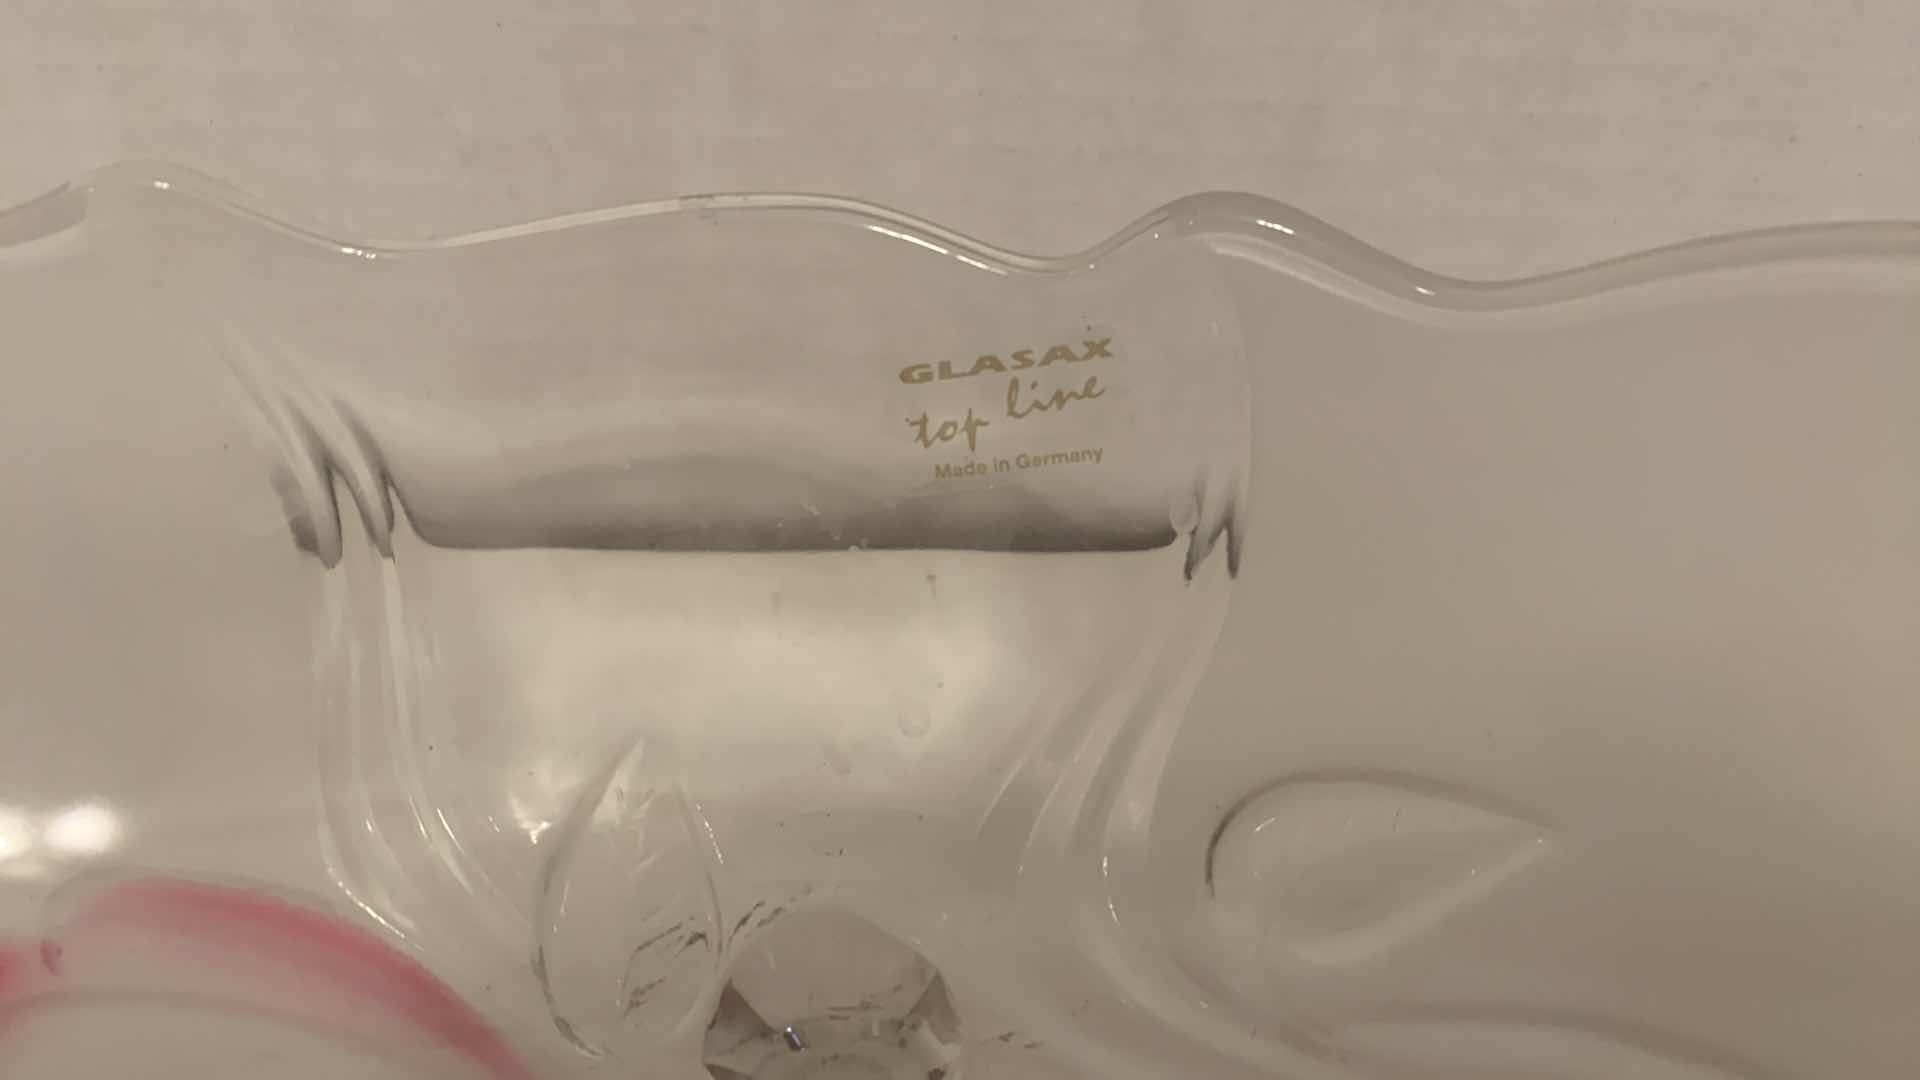 Photo 2 of GLASAX CRYSTAL BOWL MADE IN GERMANY 4” X 12”